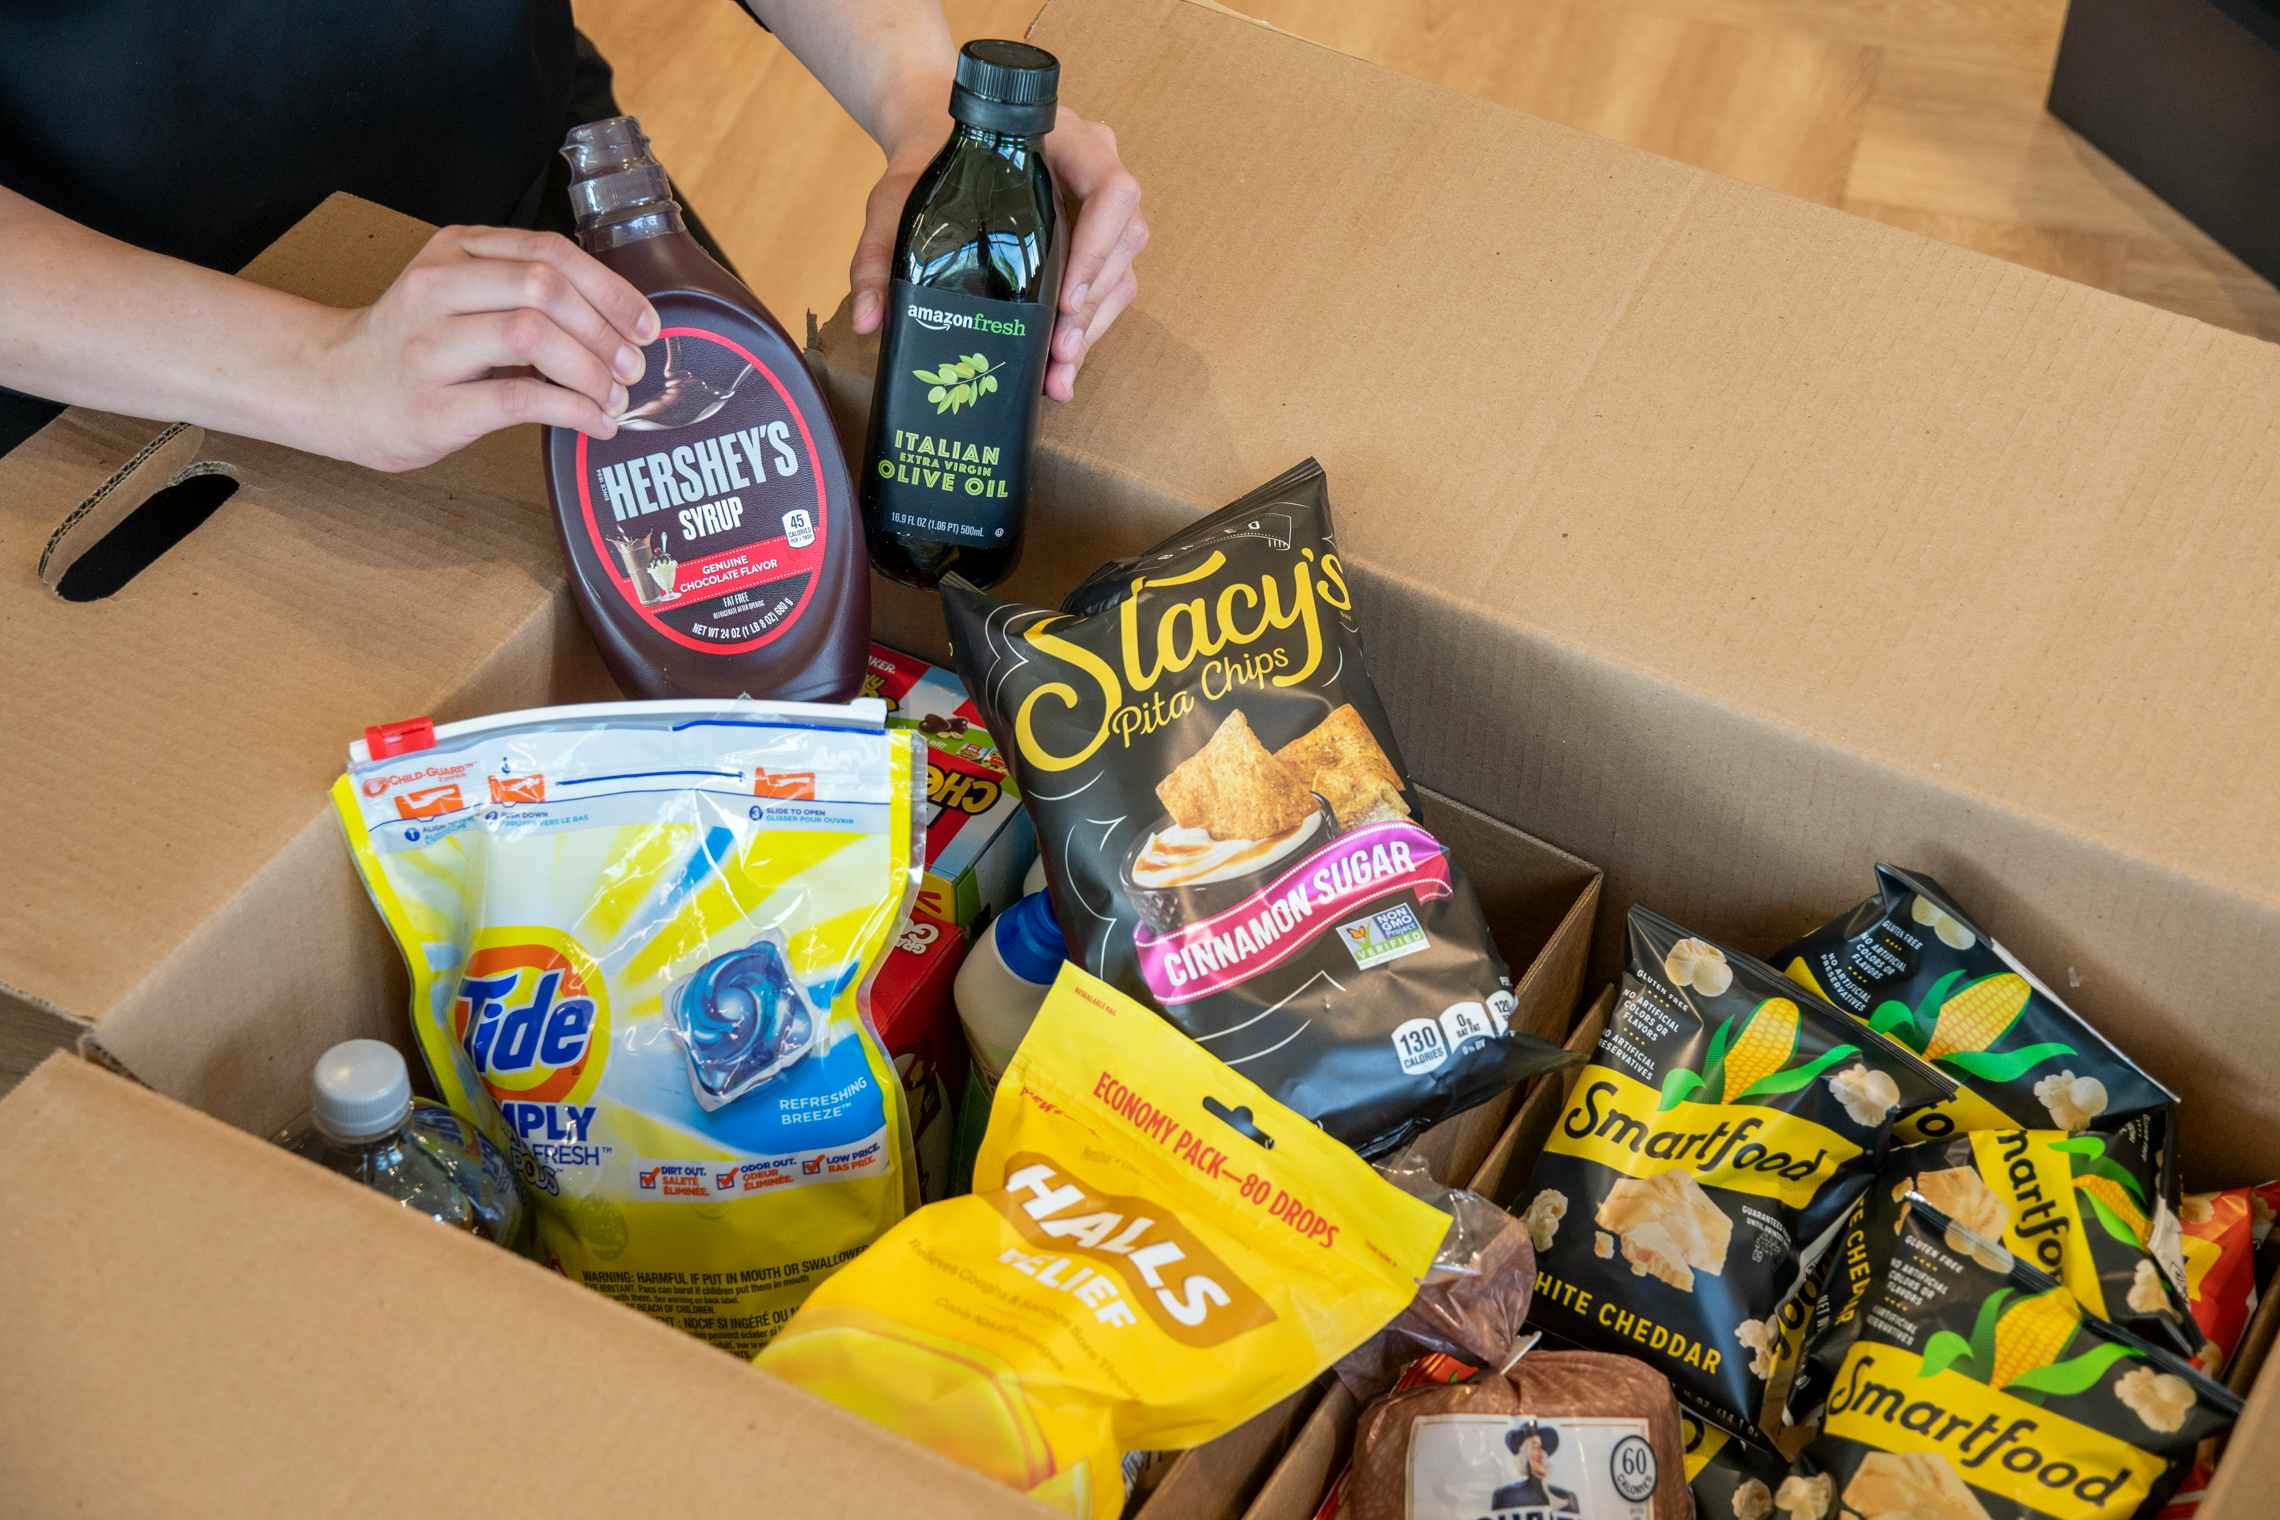 A person's hands holding up Hershey's chocolate syrup and Amazon Fresh Italian Olive Oil above a box of various groceries, including Stacy's Pita Chips, Halls cough drops, Smartfood Popcorn, and Tide Pods, ordered using Amazon Pantry.